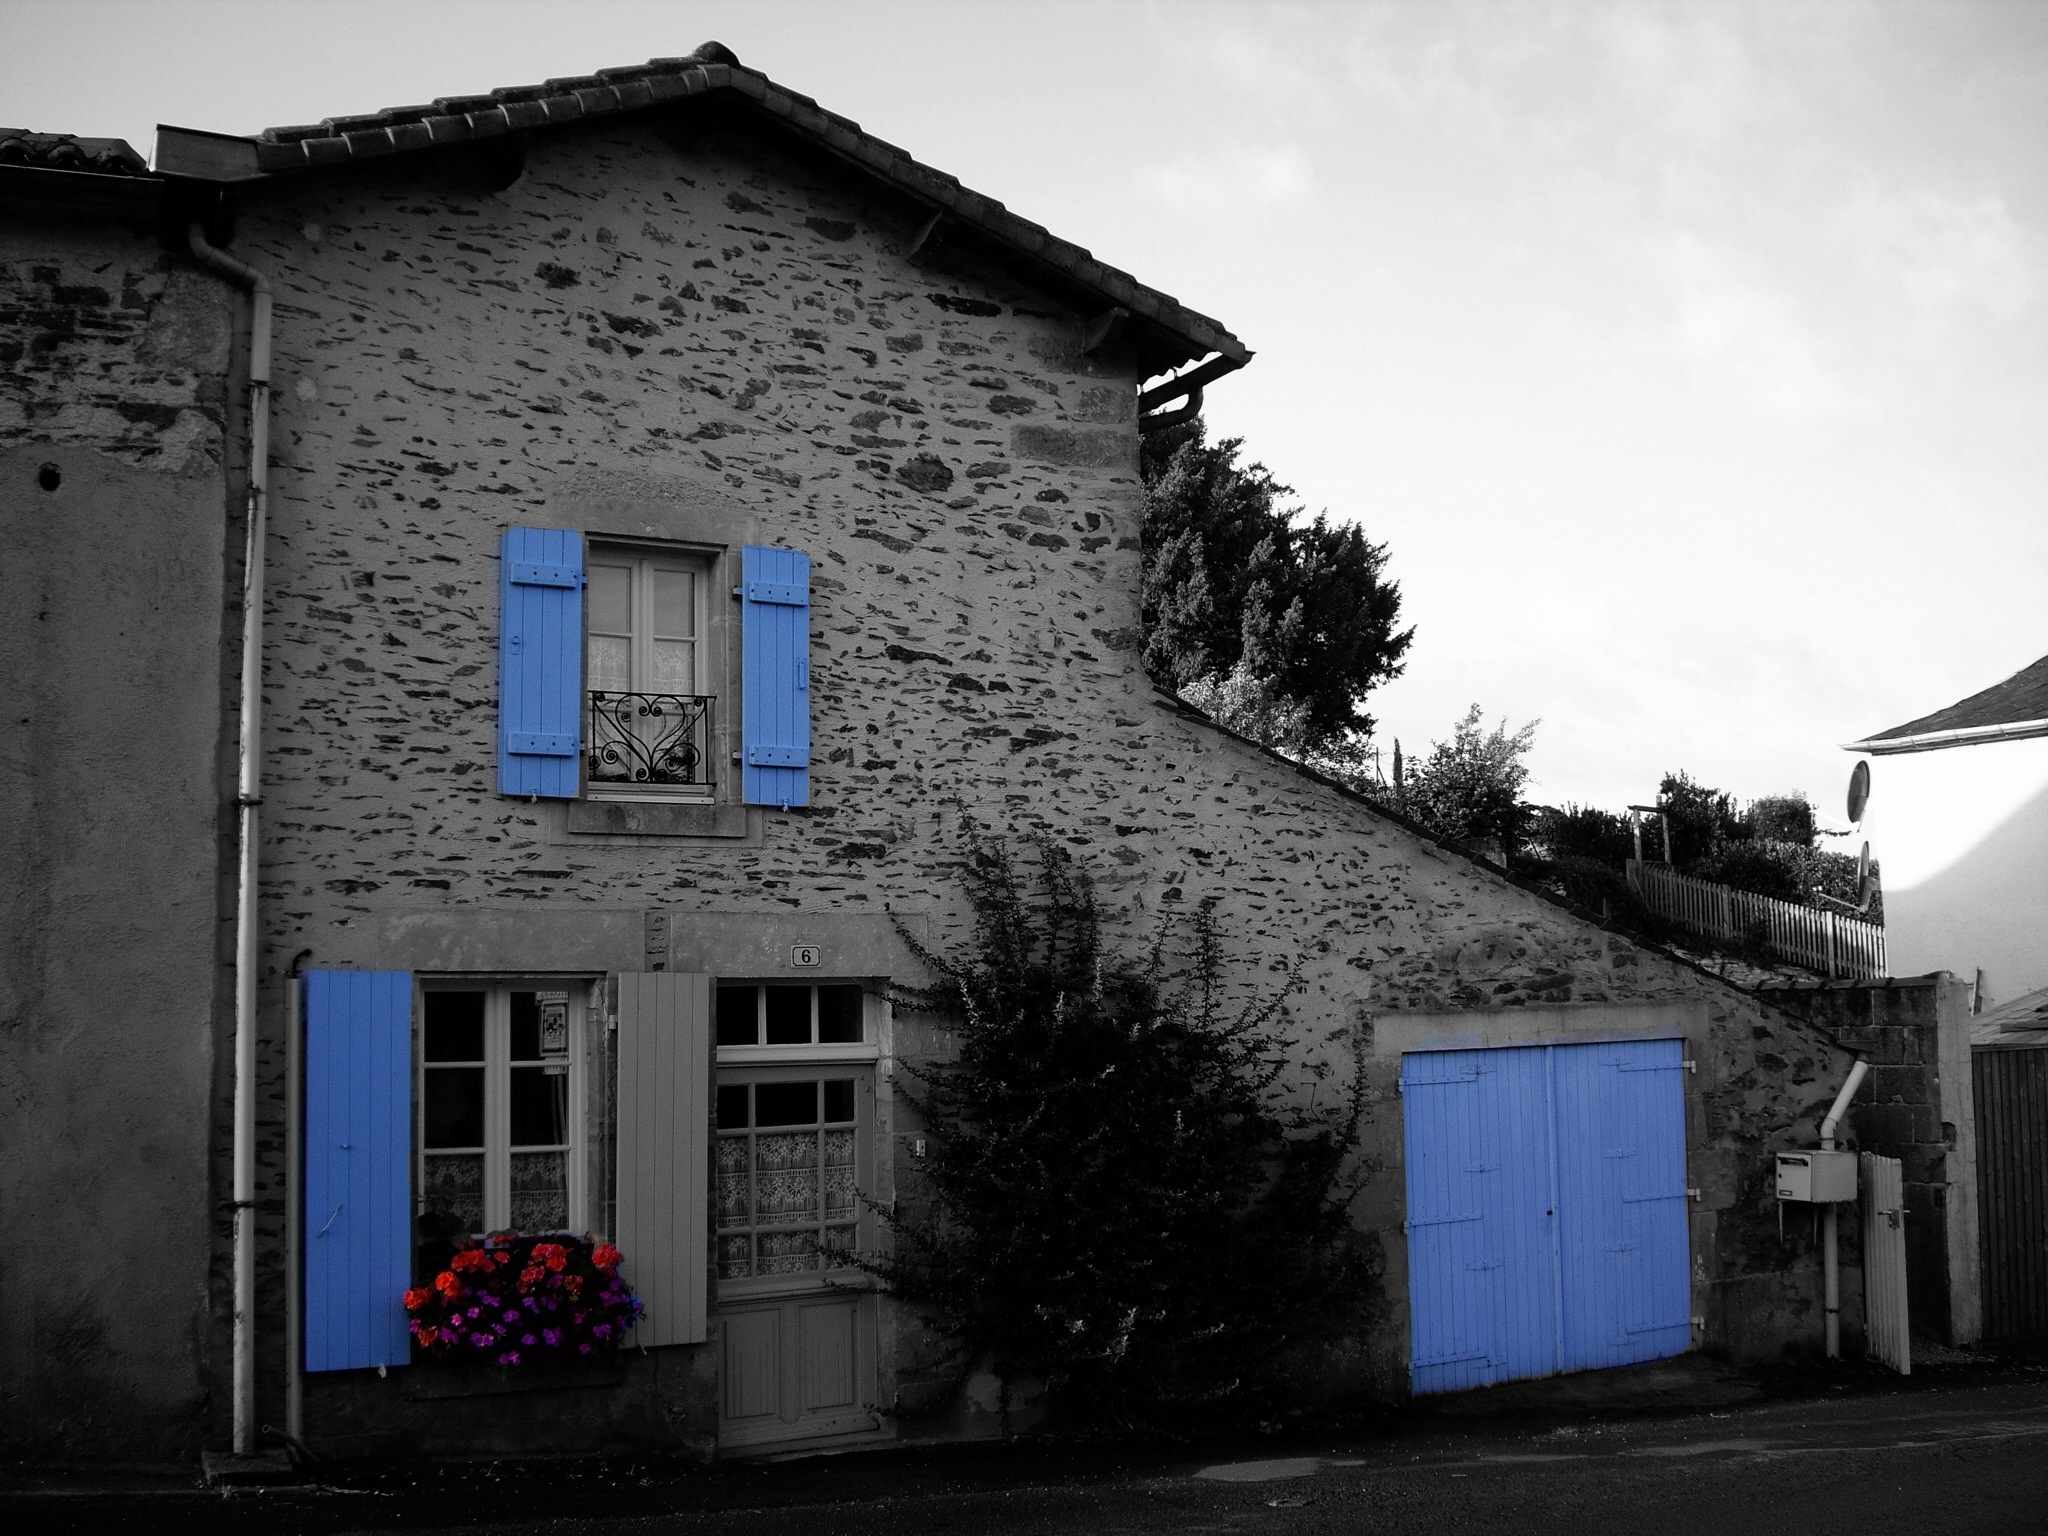 A colour splash of the front of our Gite in central France